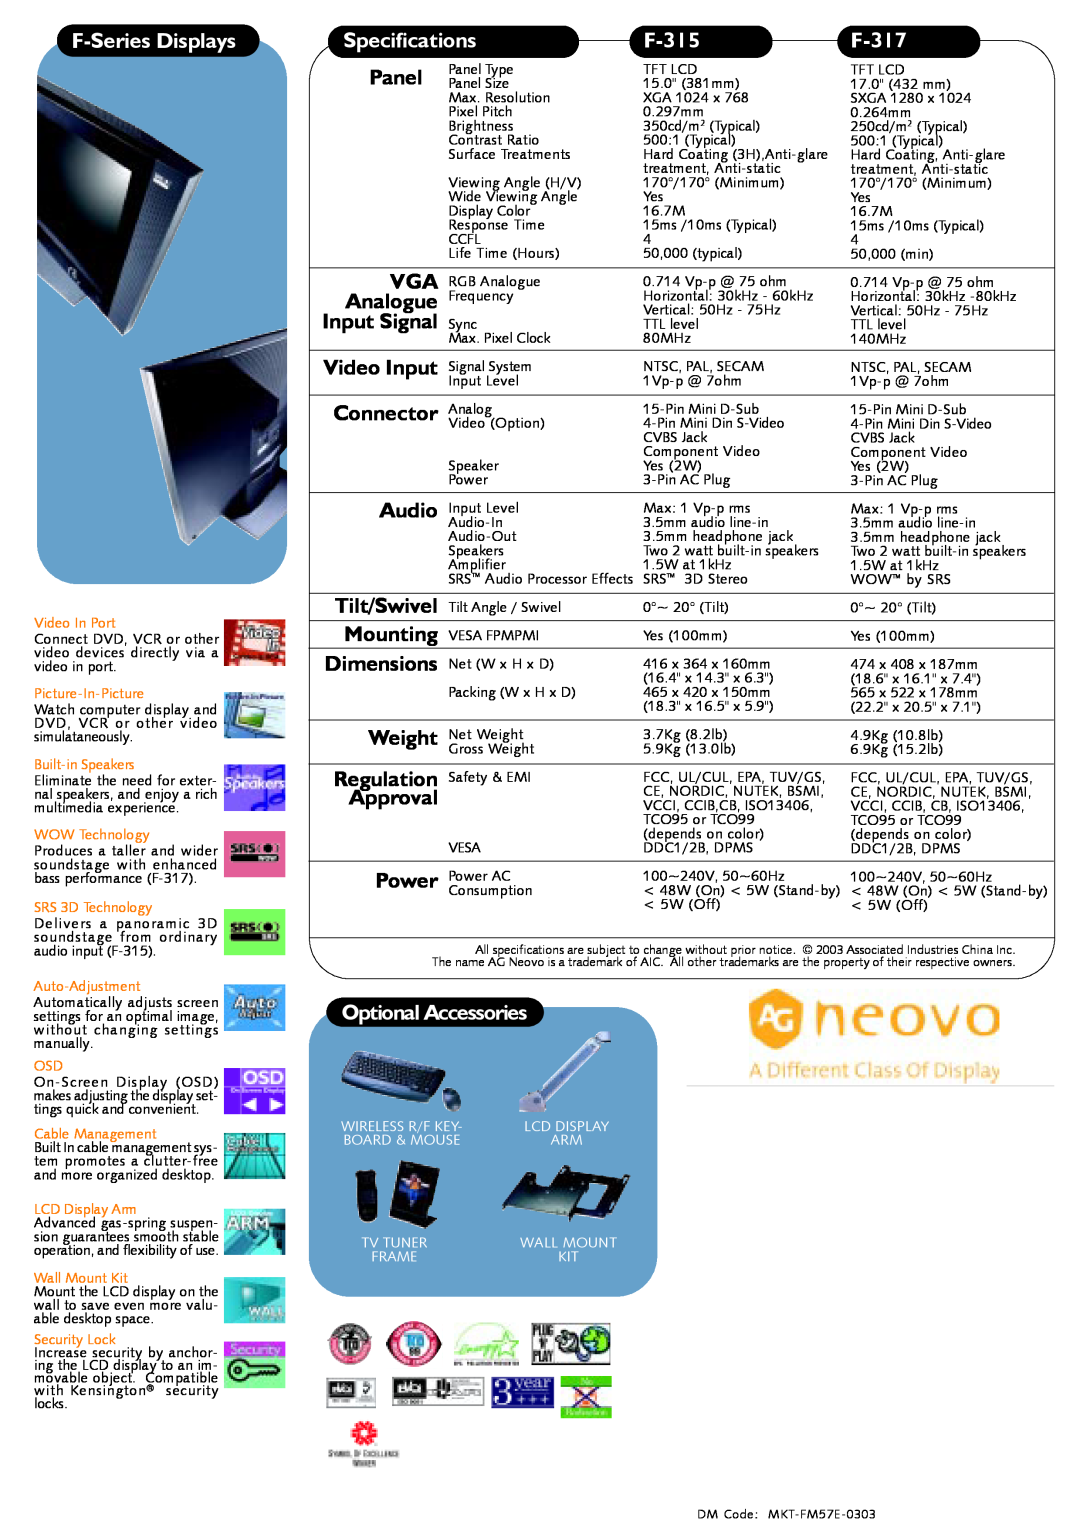 AG Neovo F-315 manual F-Series Displays, Specifications, F-317, Optional Accessories 